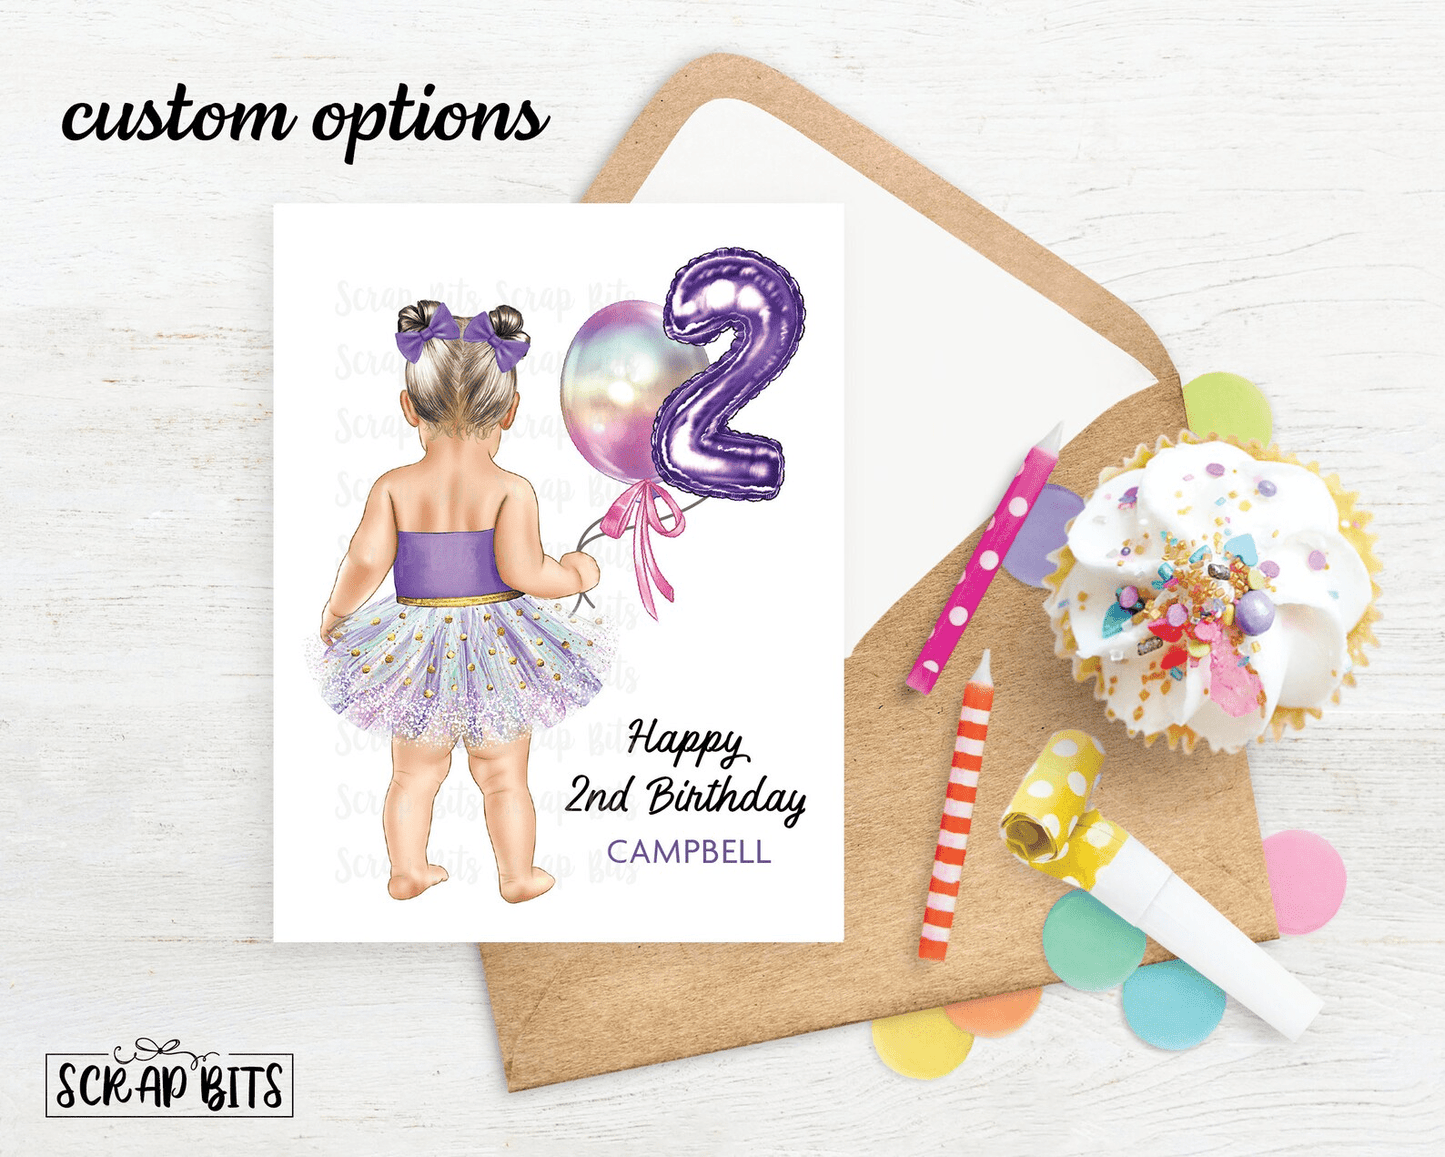 2nd Birthday Card, Baby Tutu Girl With Balloons 1st, 2nd or 3rd Birthday . Birthday Portrait Card - Scrap Bits